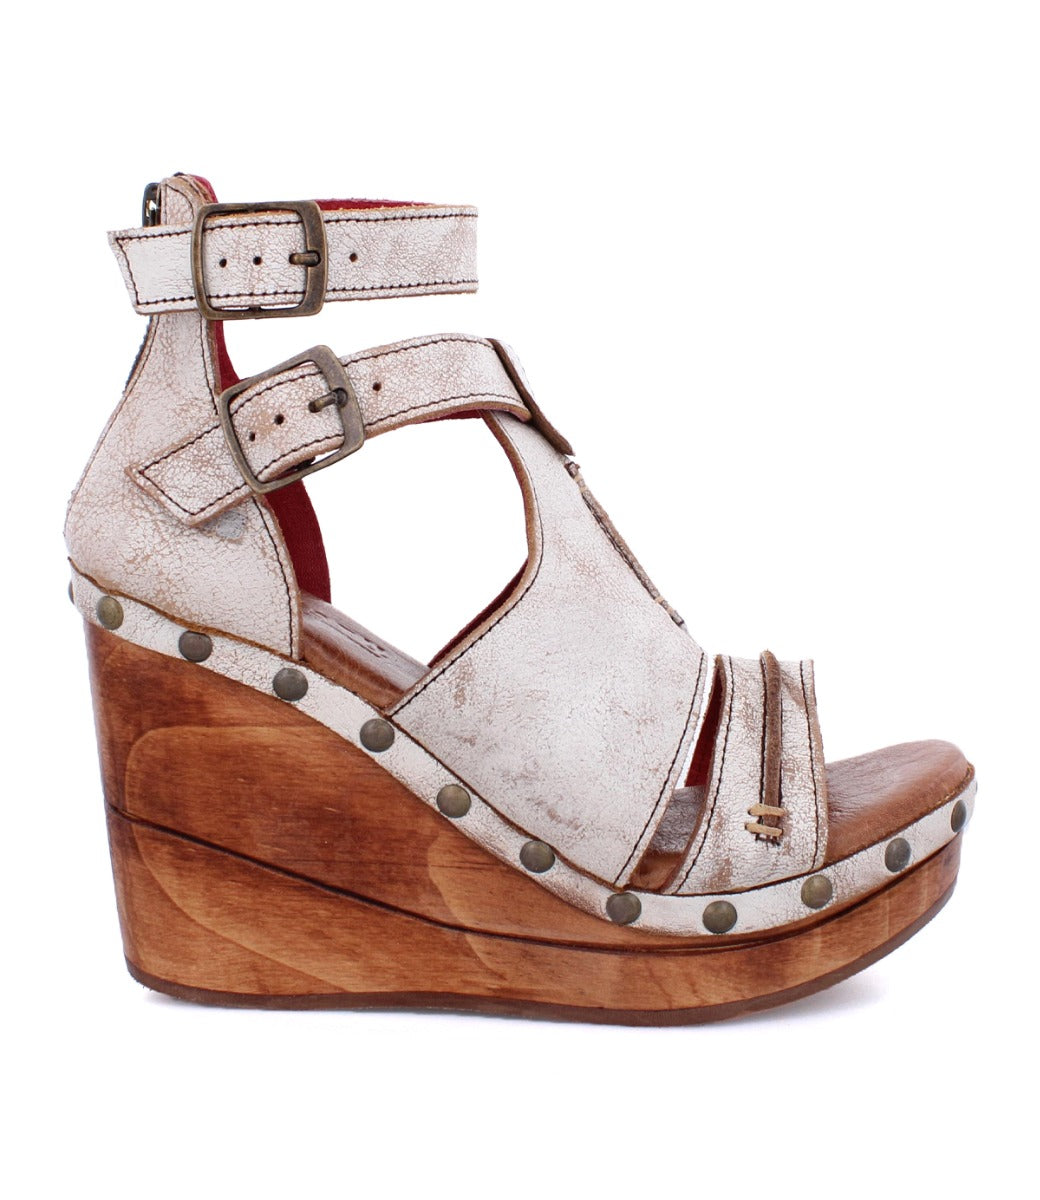 A women's white wedge sandal with straps and wooden platform called the Princess by Bed Stu.